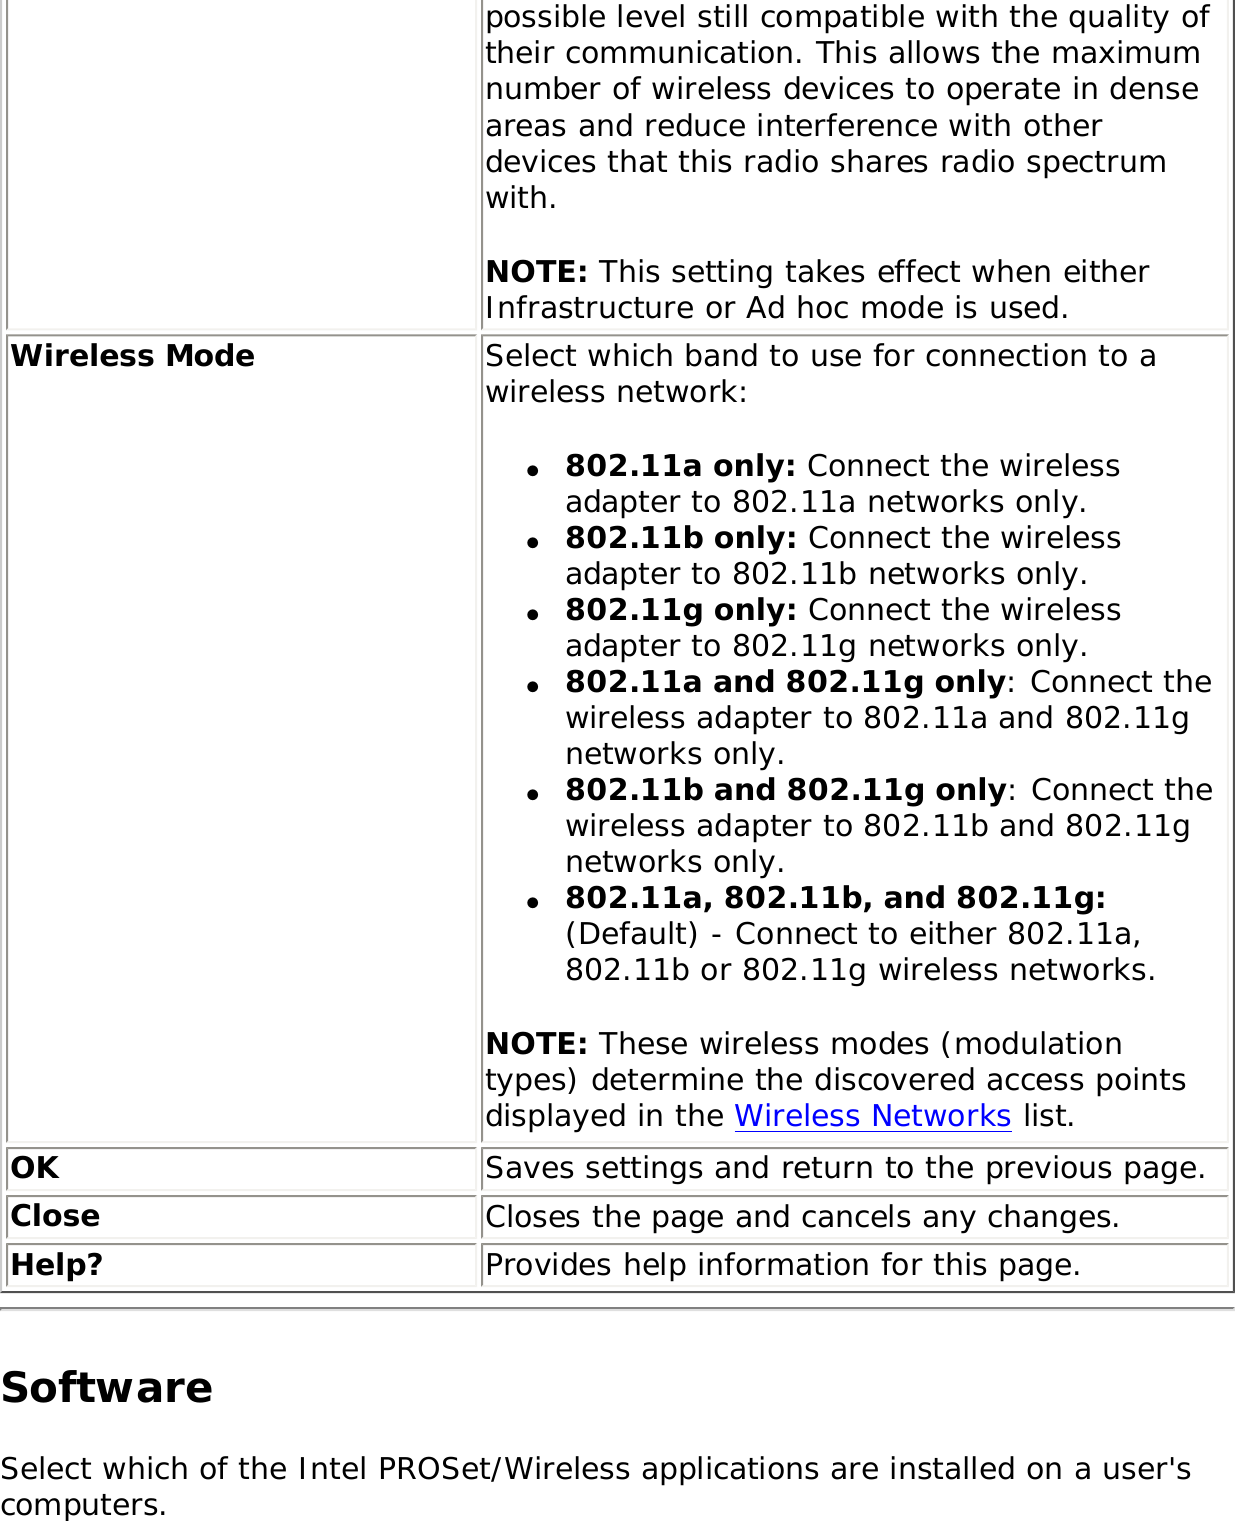 possible level still compatible with the quality of their communication. This allows the maximum number of wireless devices to operate in dense areas and reduce interference with other devices that this radio shares radio spectrum with. NOTE: This setting takes effect when either Infrastructure or Ad hoc mode is used. Wireless Mode Select which band to use for connection to a wireless network: ●     802.11a only: Connect the wireless adapter to 802.11a networks only.●     802.11b only: Connect the wireless adapter to 802.11b networks only.●     802.11g only: Connect the wireless adapter to 802.11g networks only.  ●     802.11a and 802.11g only: Connect the wireless adapter to 802.11a and 802.11g networks only.●     802.11b and 802.11g only: Connect the wireless adapter to 802.11b and 802.11g networks only.●     802.11a, 802.11b, and 802.11g: (Default) - Connect to either 802.11a, 802.11b or 802.11g wireless networks.NOTE: These wireless modes (modulation types) determine the discovered access points displayed in the Wireless Networks list.OK Saves settings and return to the previous page.Close Closes the page and cancels any changes.Help? Provides help information for this page.Software Select which of the Intel PROSet/Wireless applications are installed on a user&apos;s computers. 